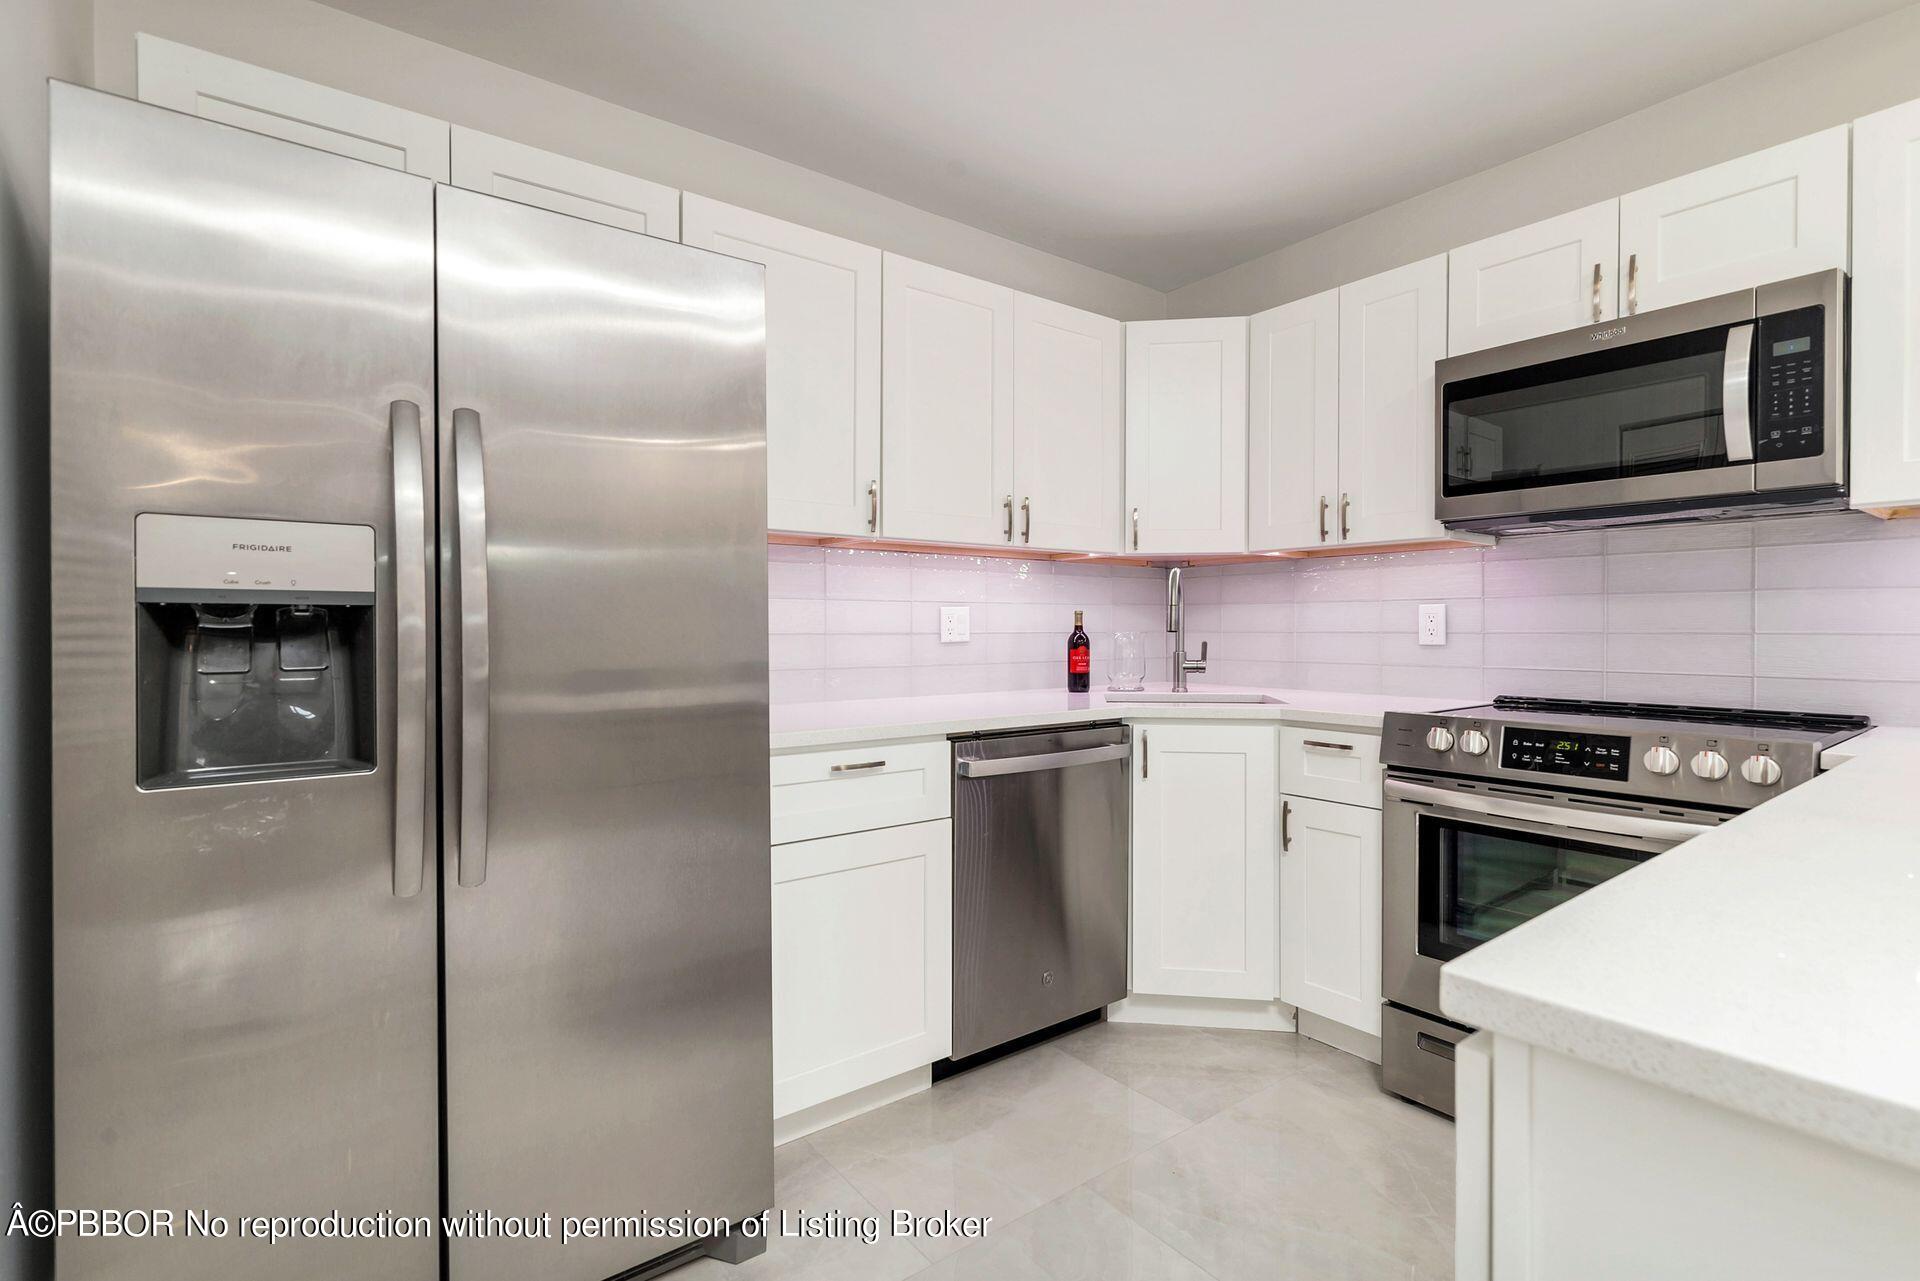 a kitchen with cabinets stainless steel appliances and a counter top